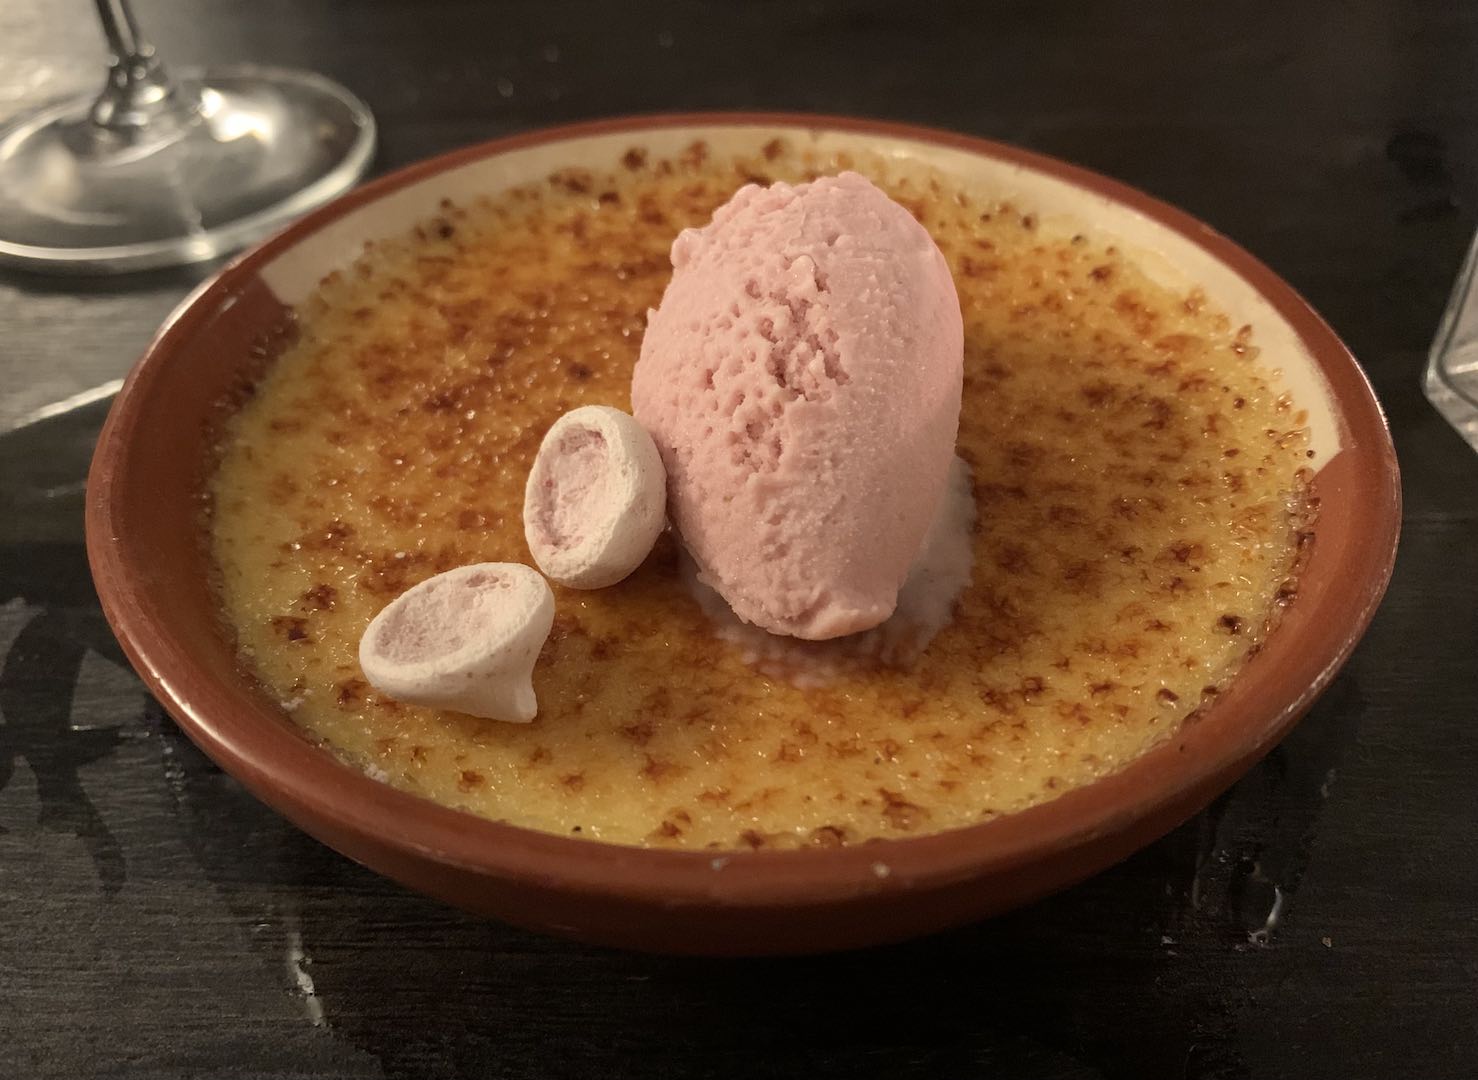 A local spin on Crème brûlée in Portugal.